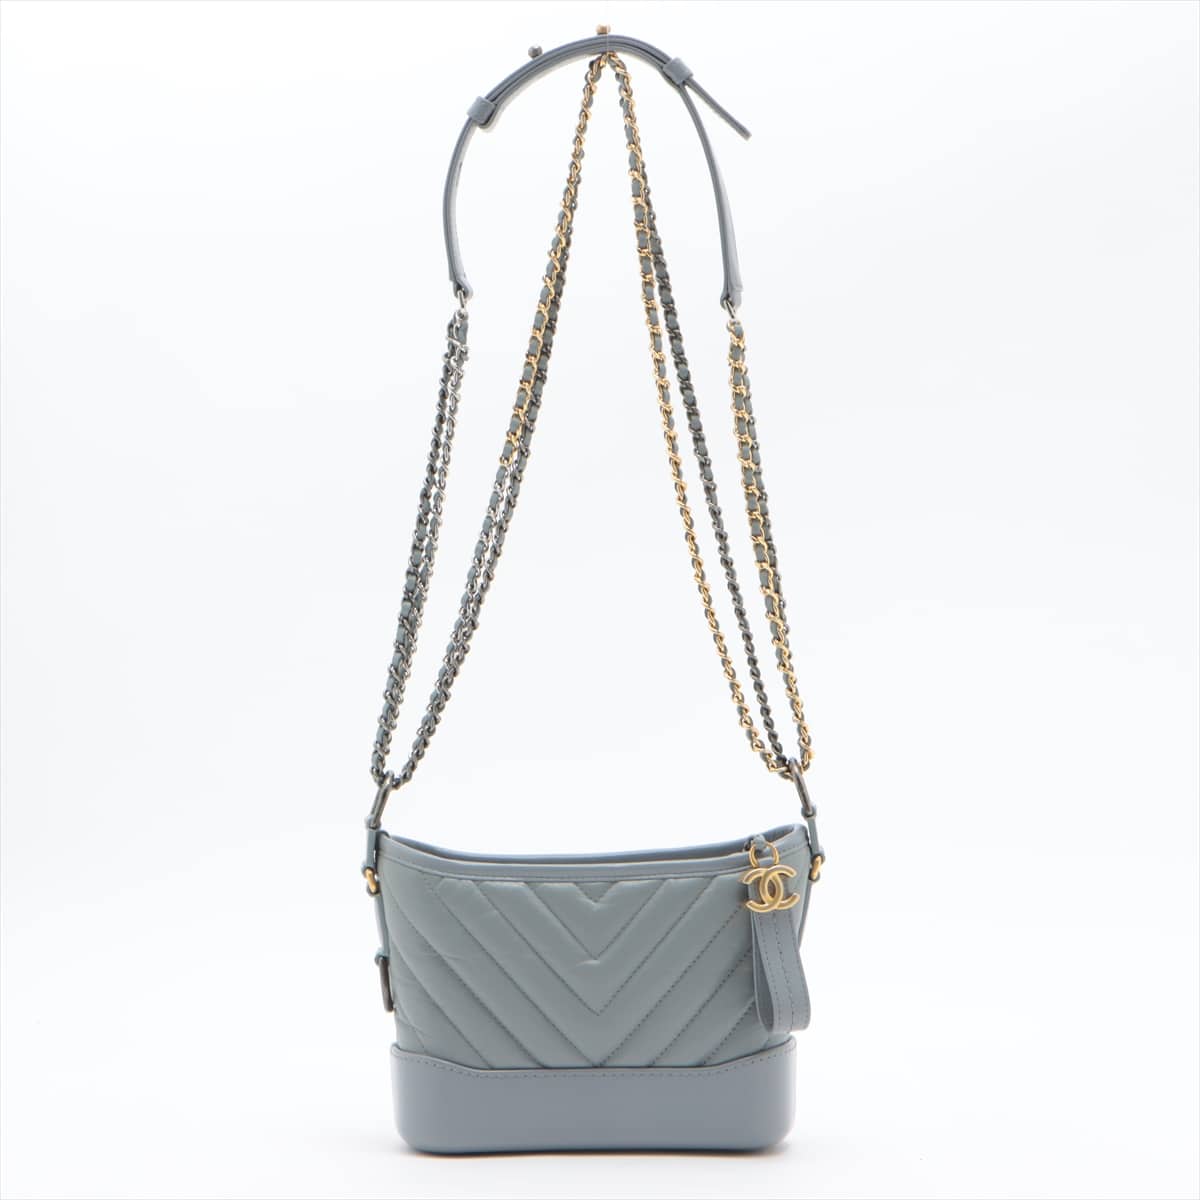 Chanel Gabrielle Doo Chanel Leather Chain shoulder bag Grey Gold x silver metal fittings 28th